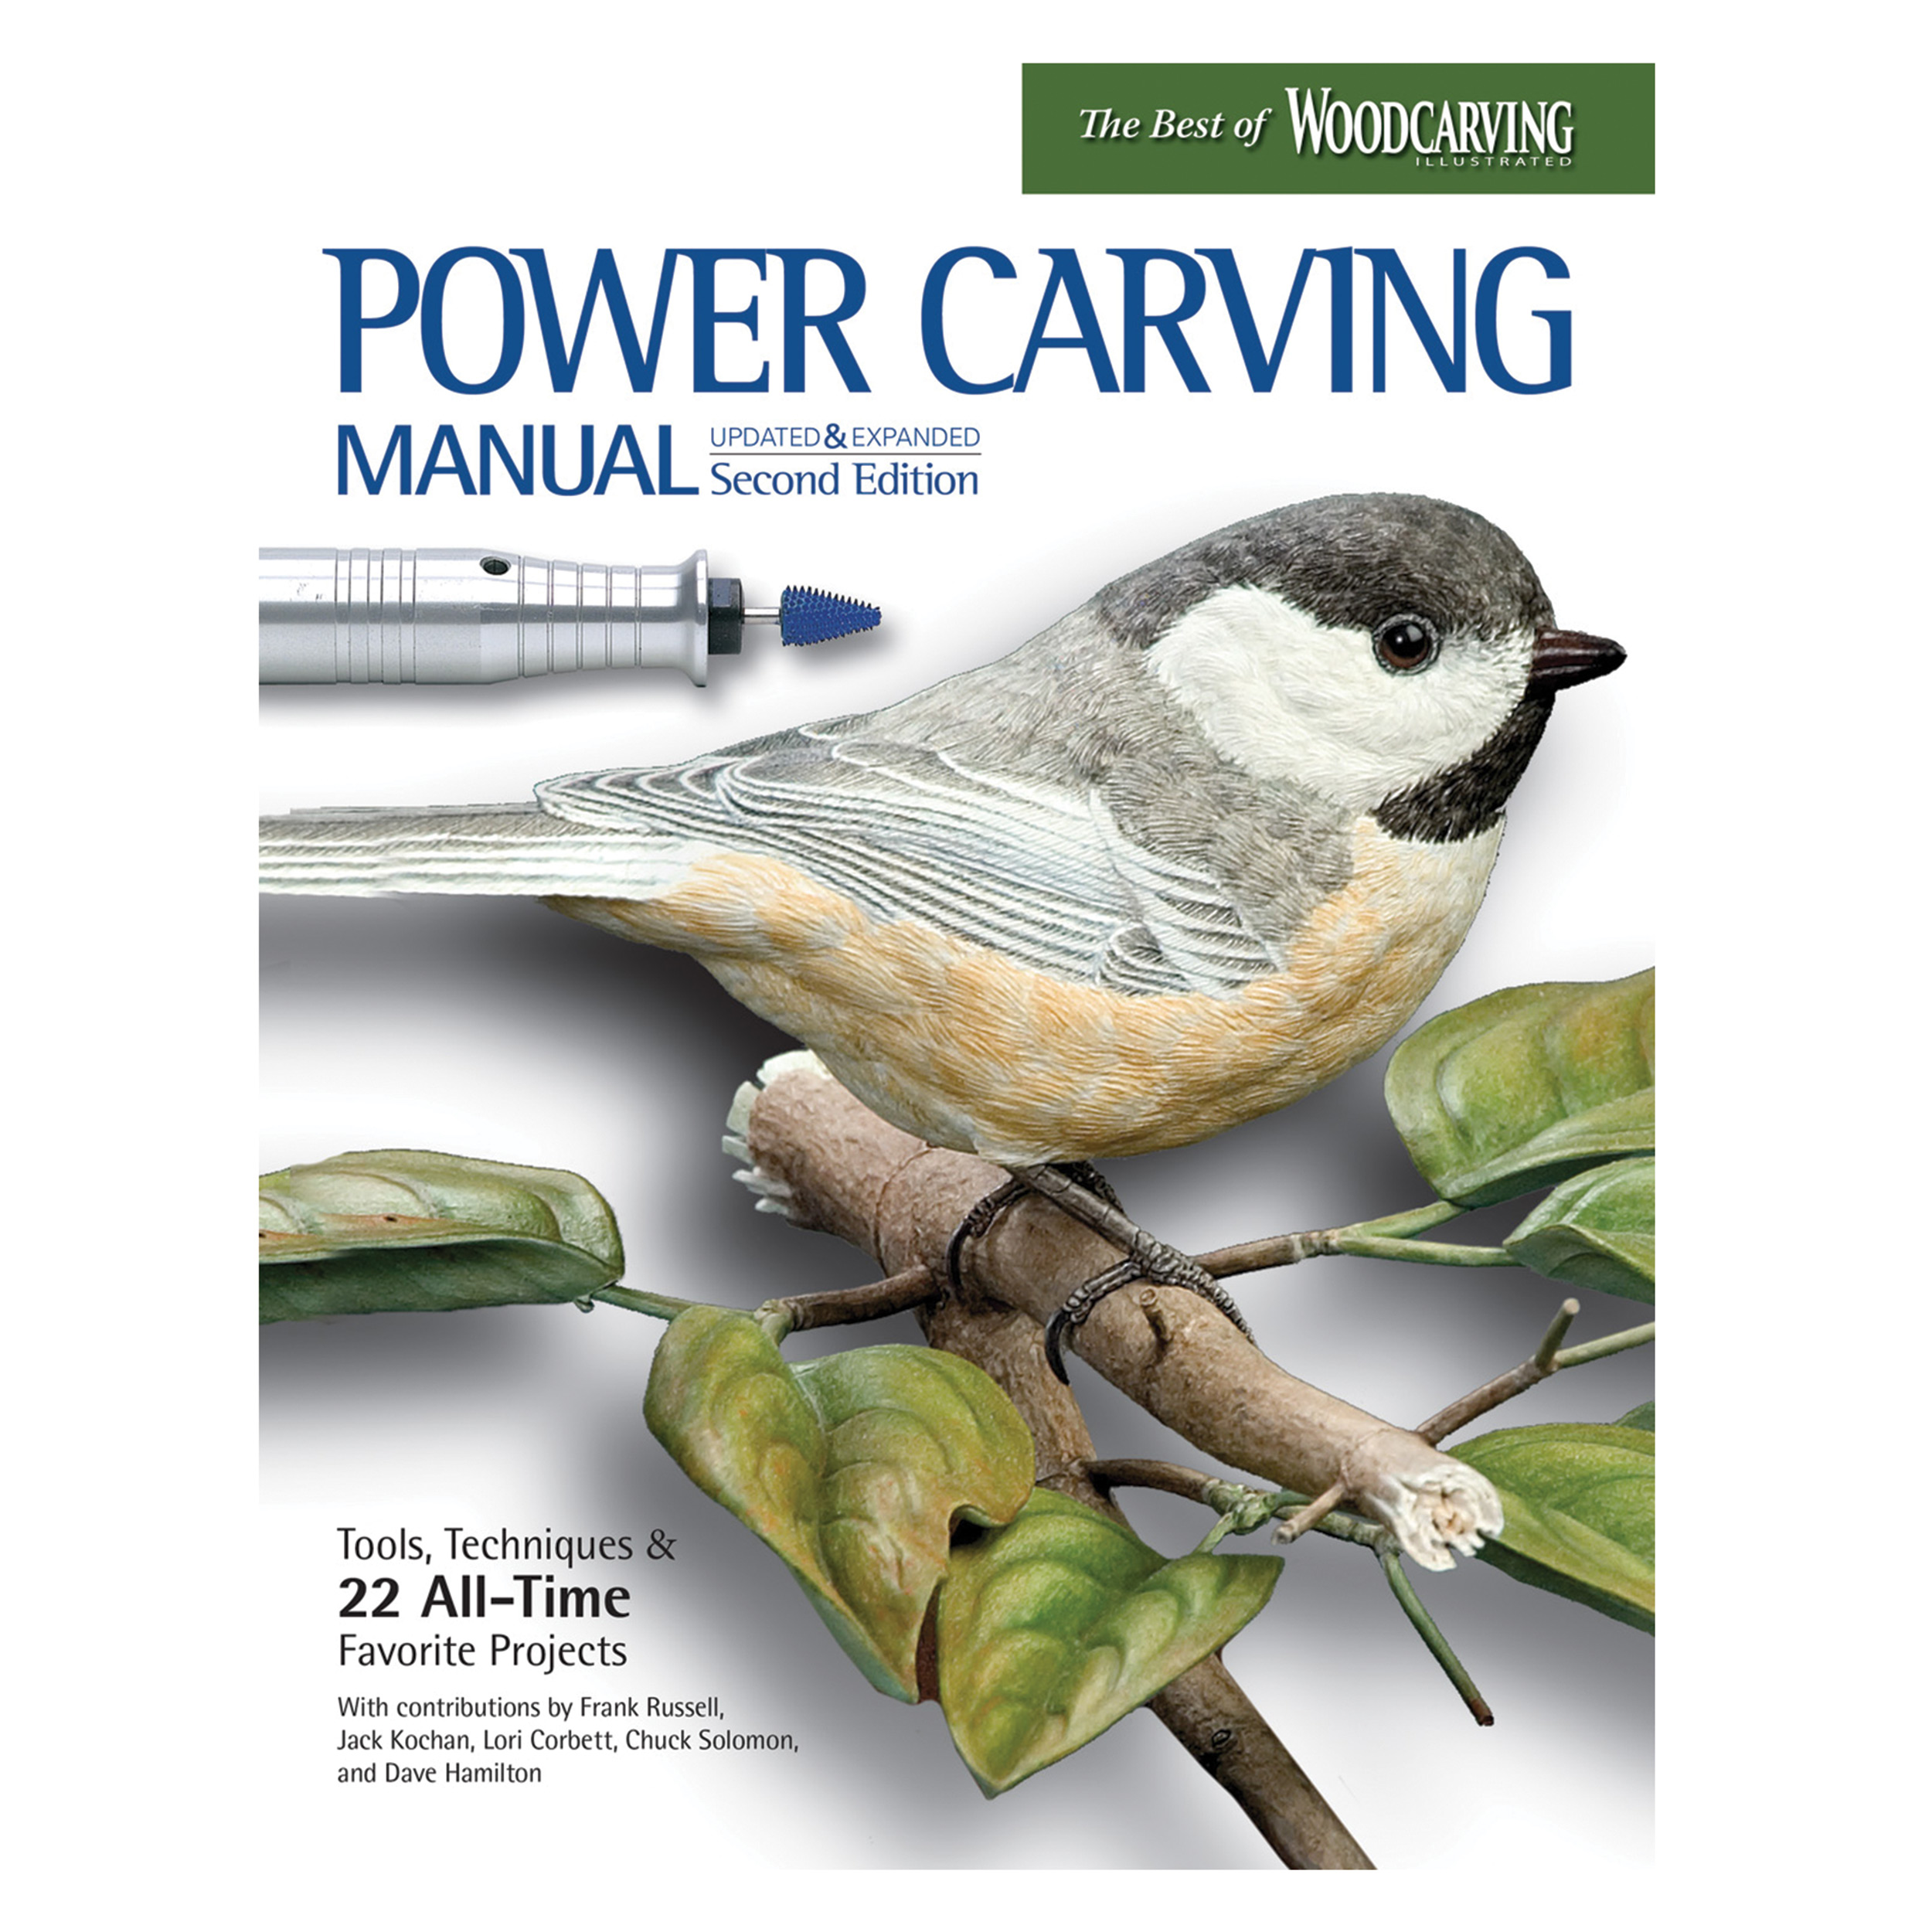 Power Carving Manual, 2nd Edition